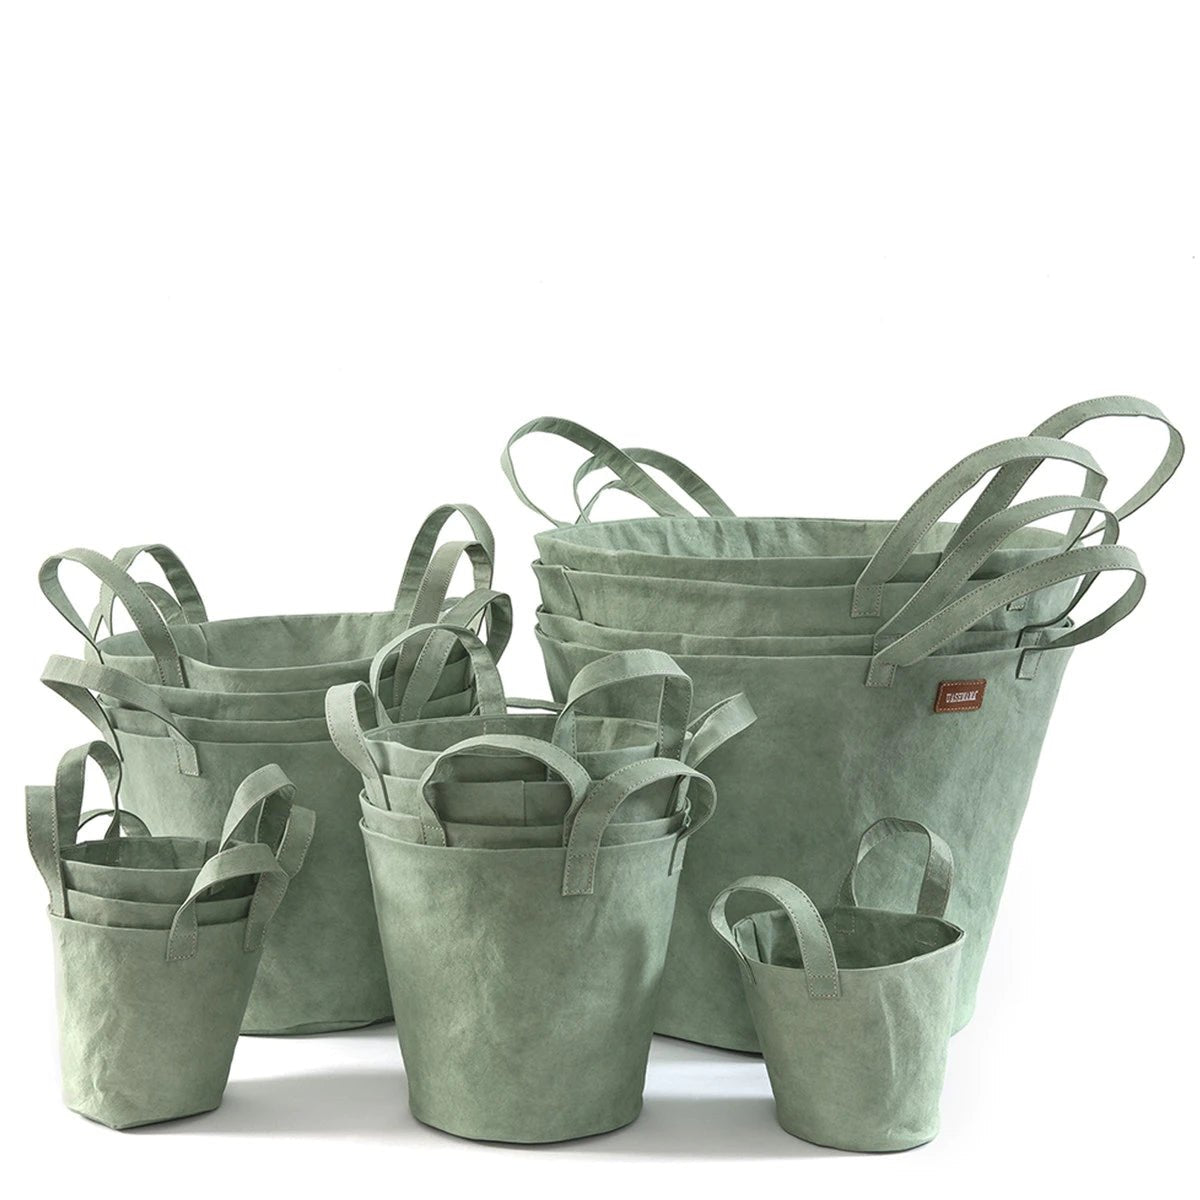 A selection of washable paper baskets are shown stacked in one another, in four varying sizes. They are shown in a sage green colour.